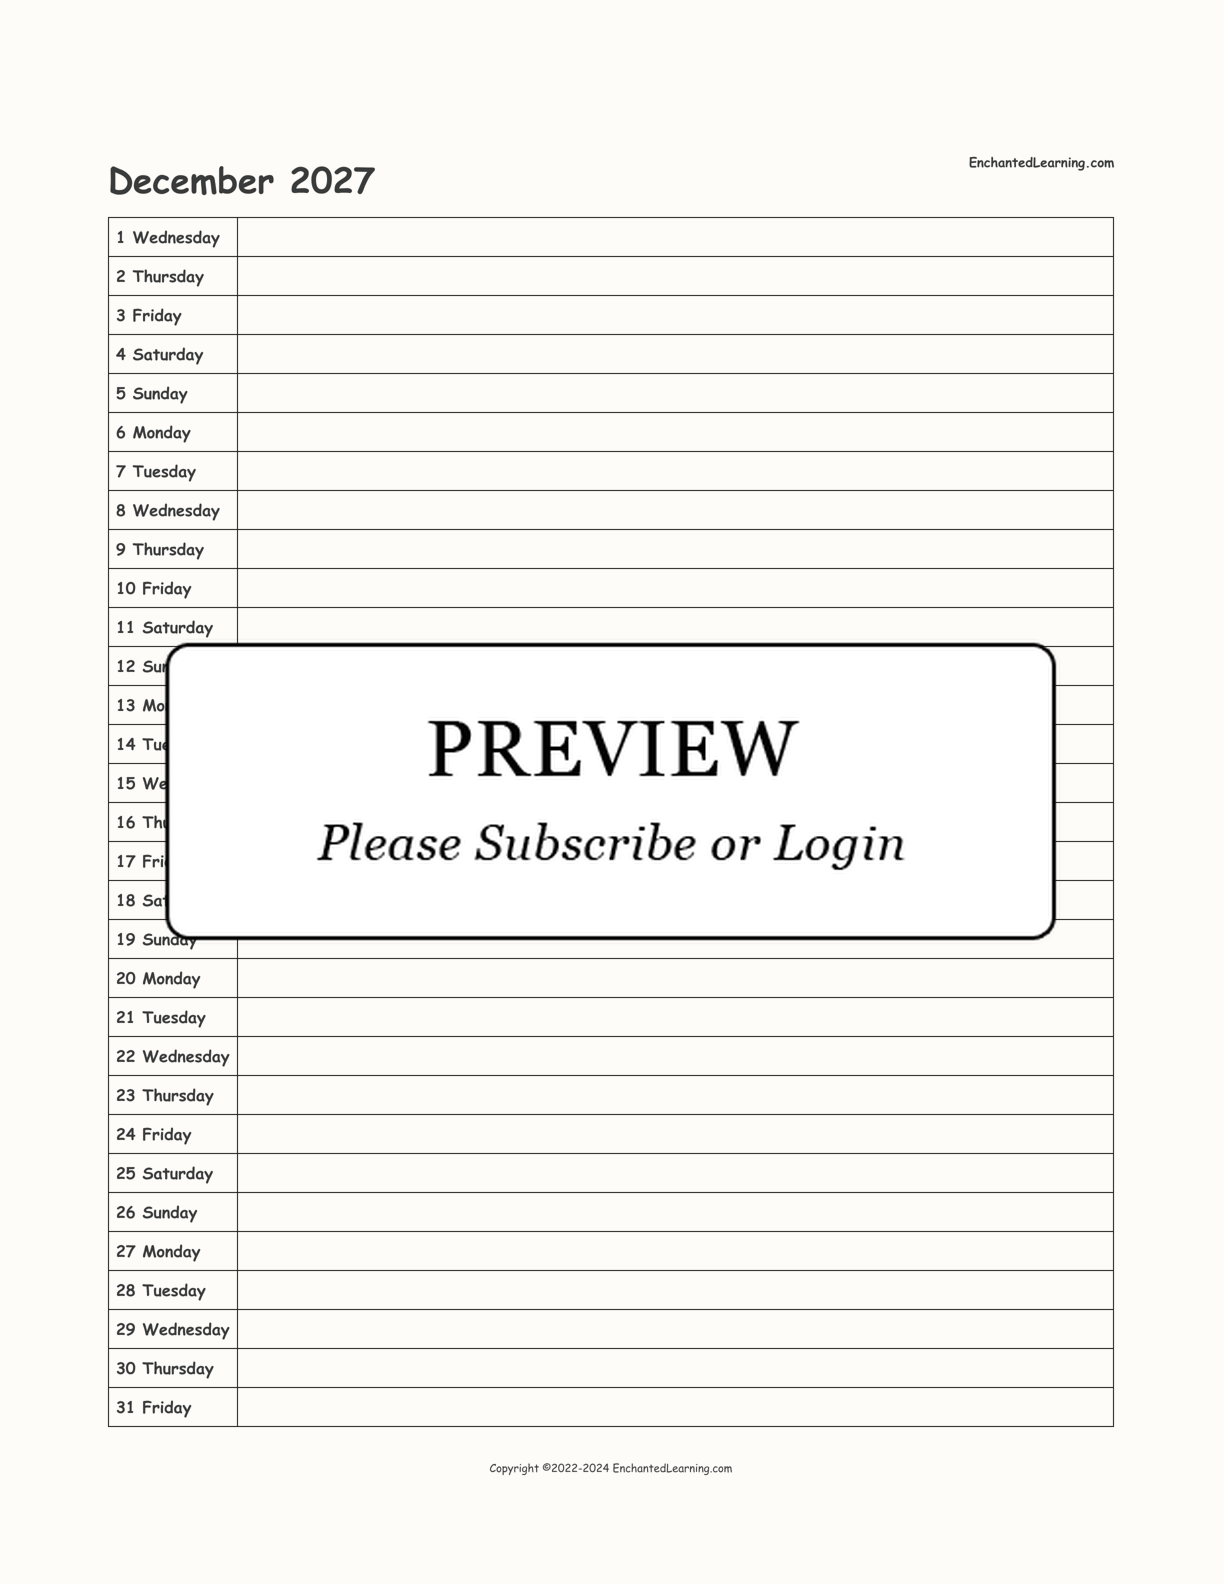 2027 Scheduling Calendar interactive printout page 12